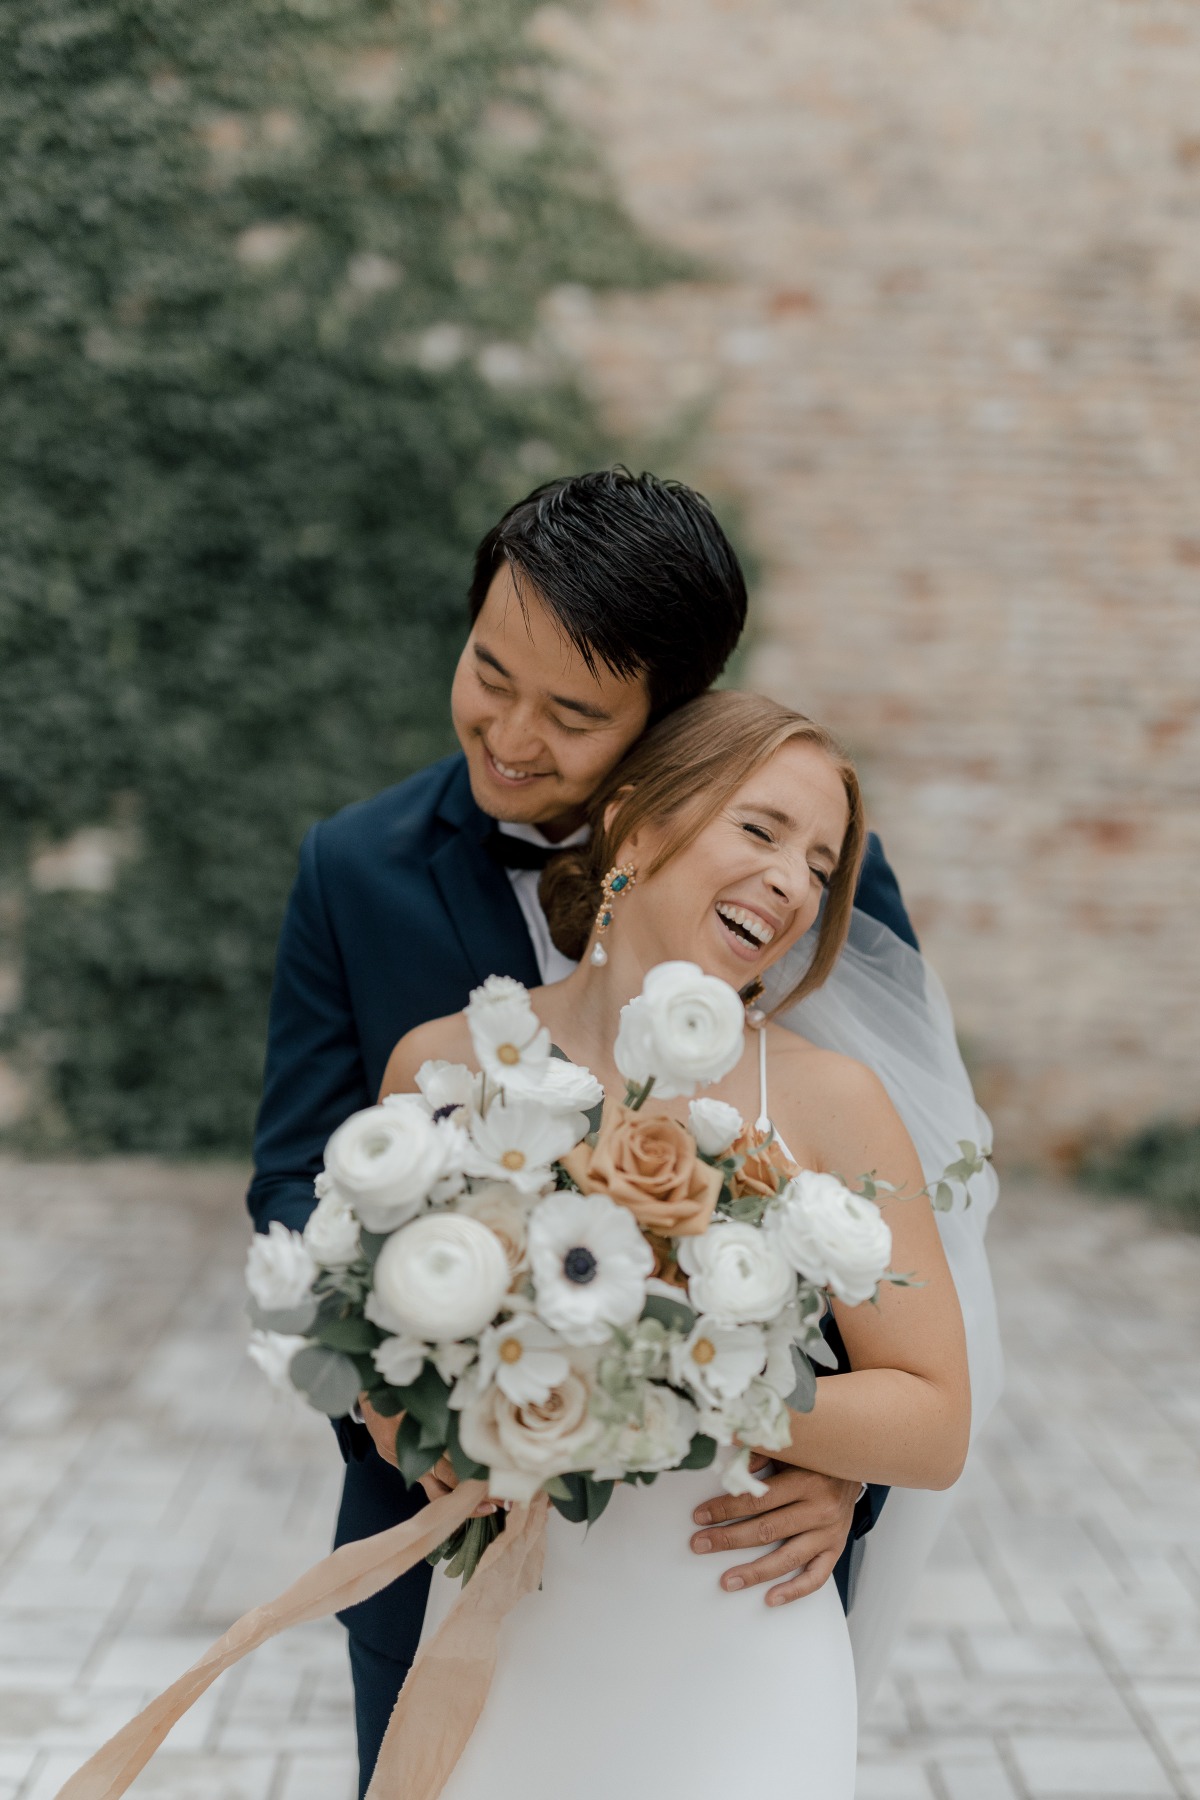 Groom hugging bride from behind holding bouquet